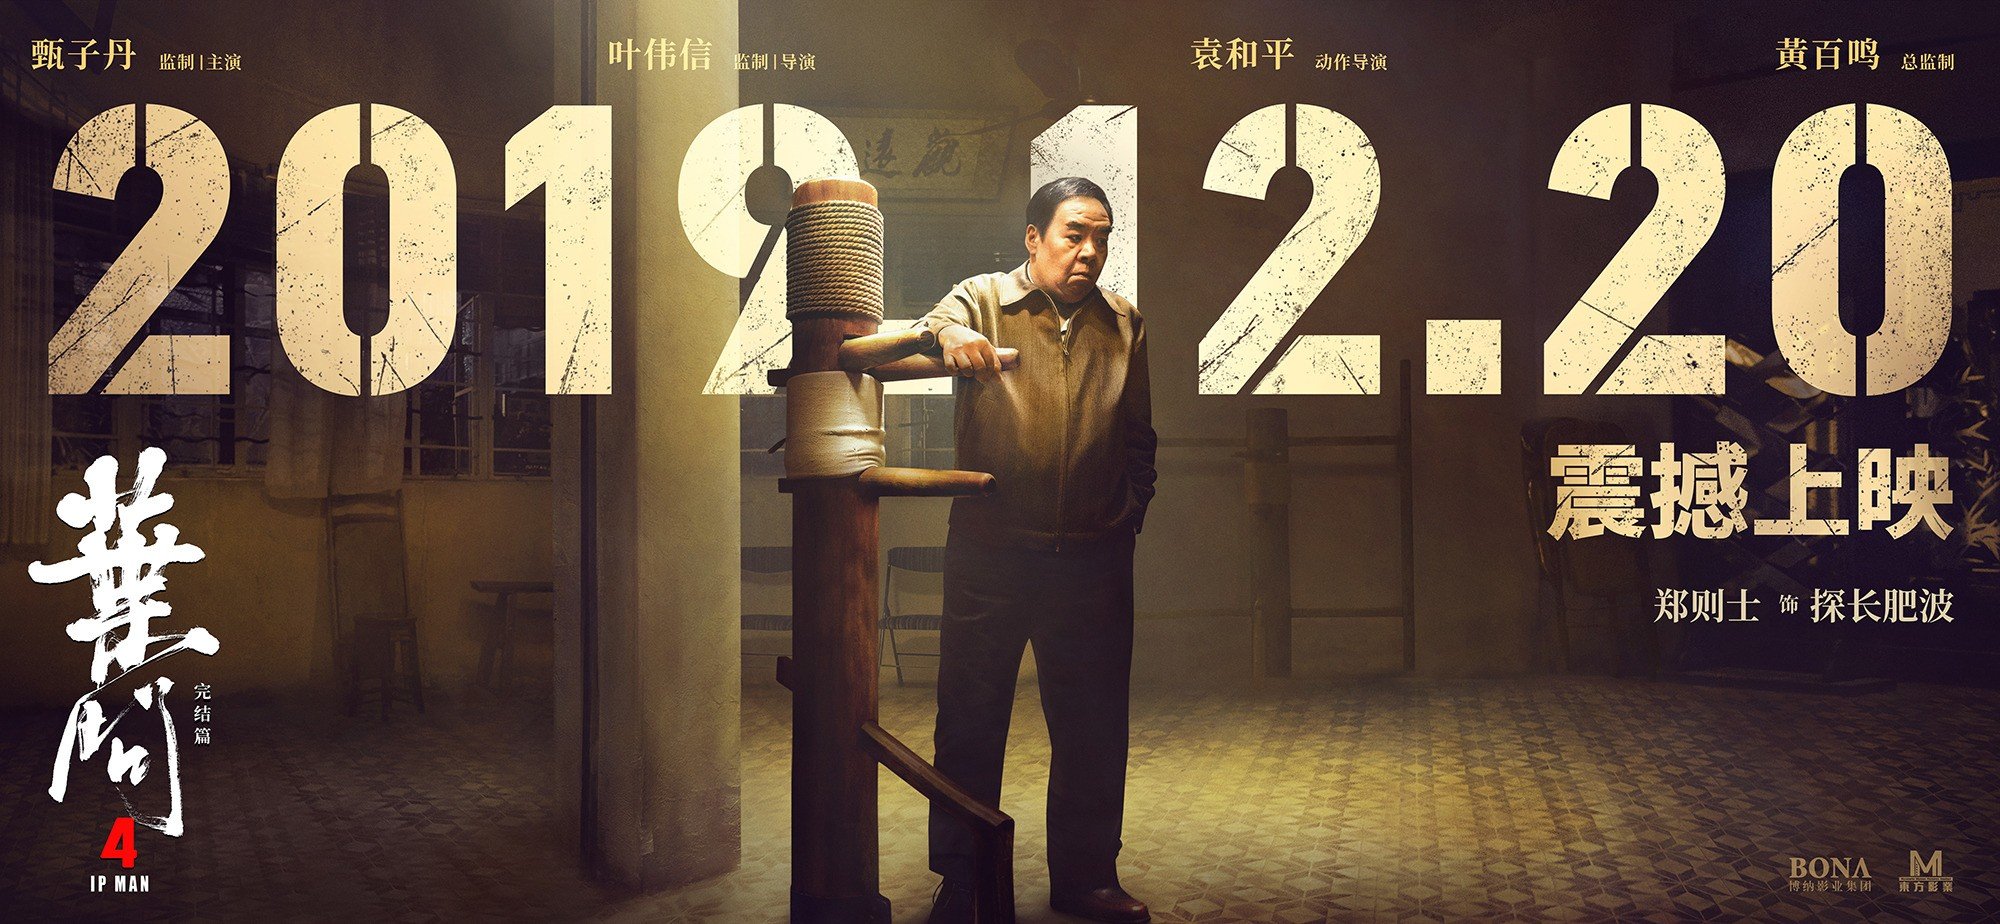 Ip Man 4: The Finale (2019) Pictures, Photo, Image and ...